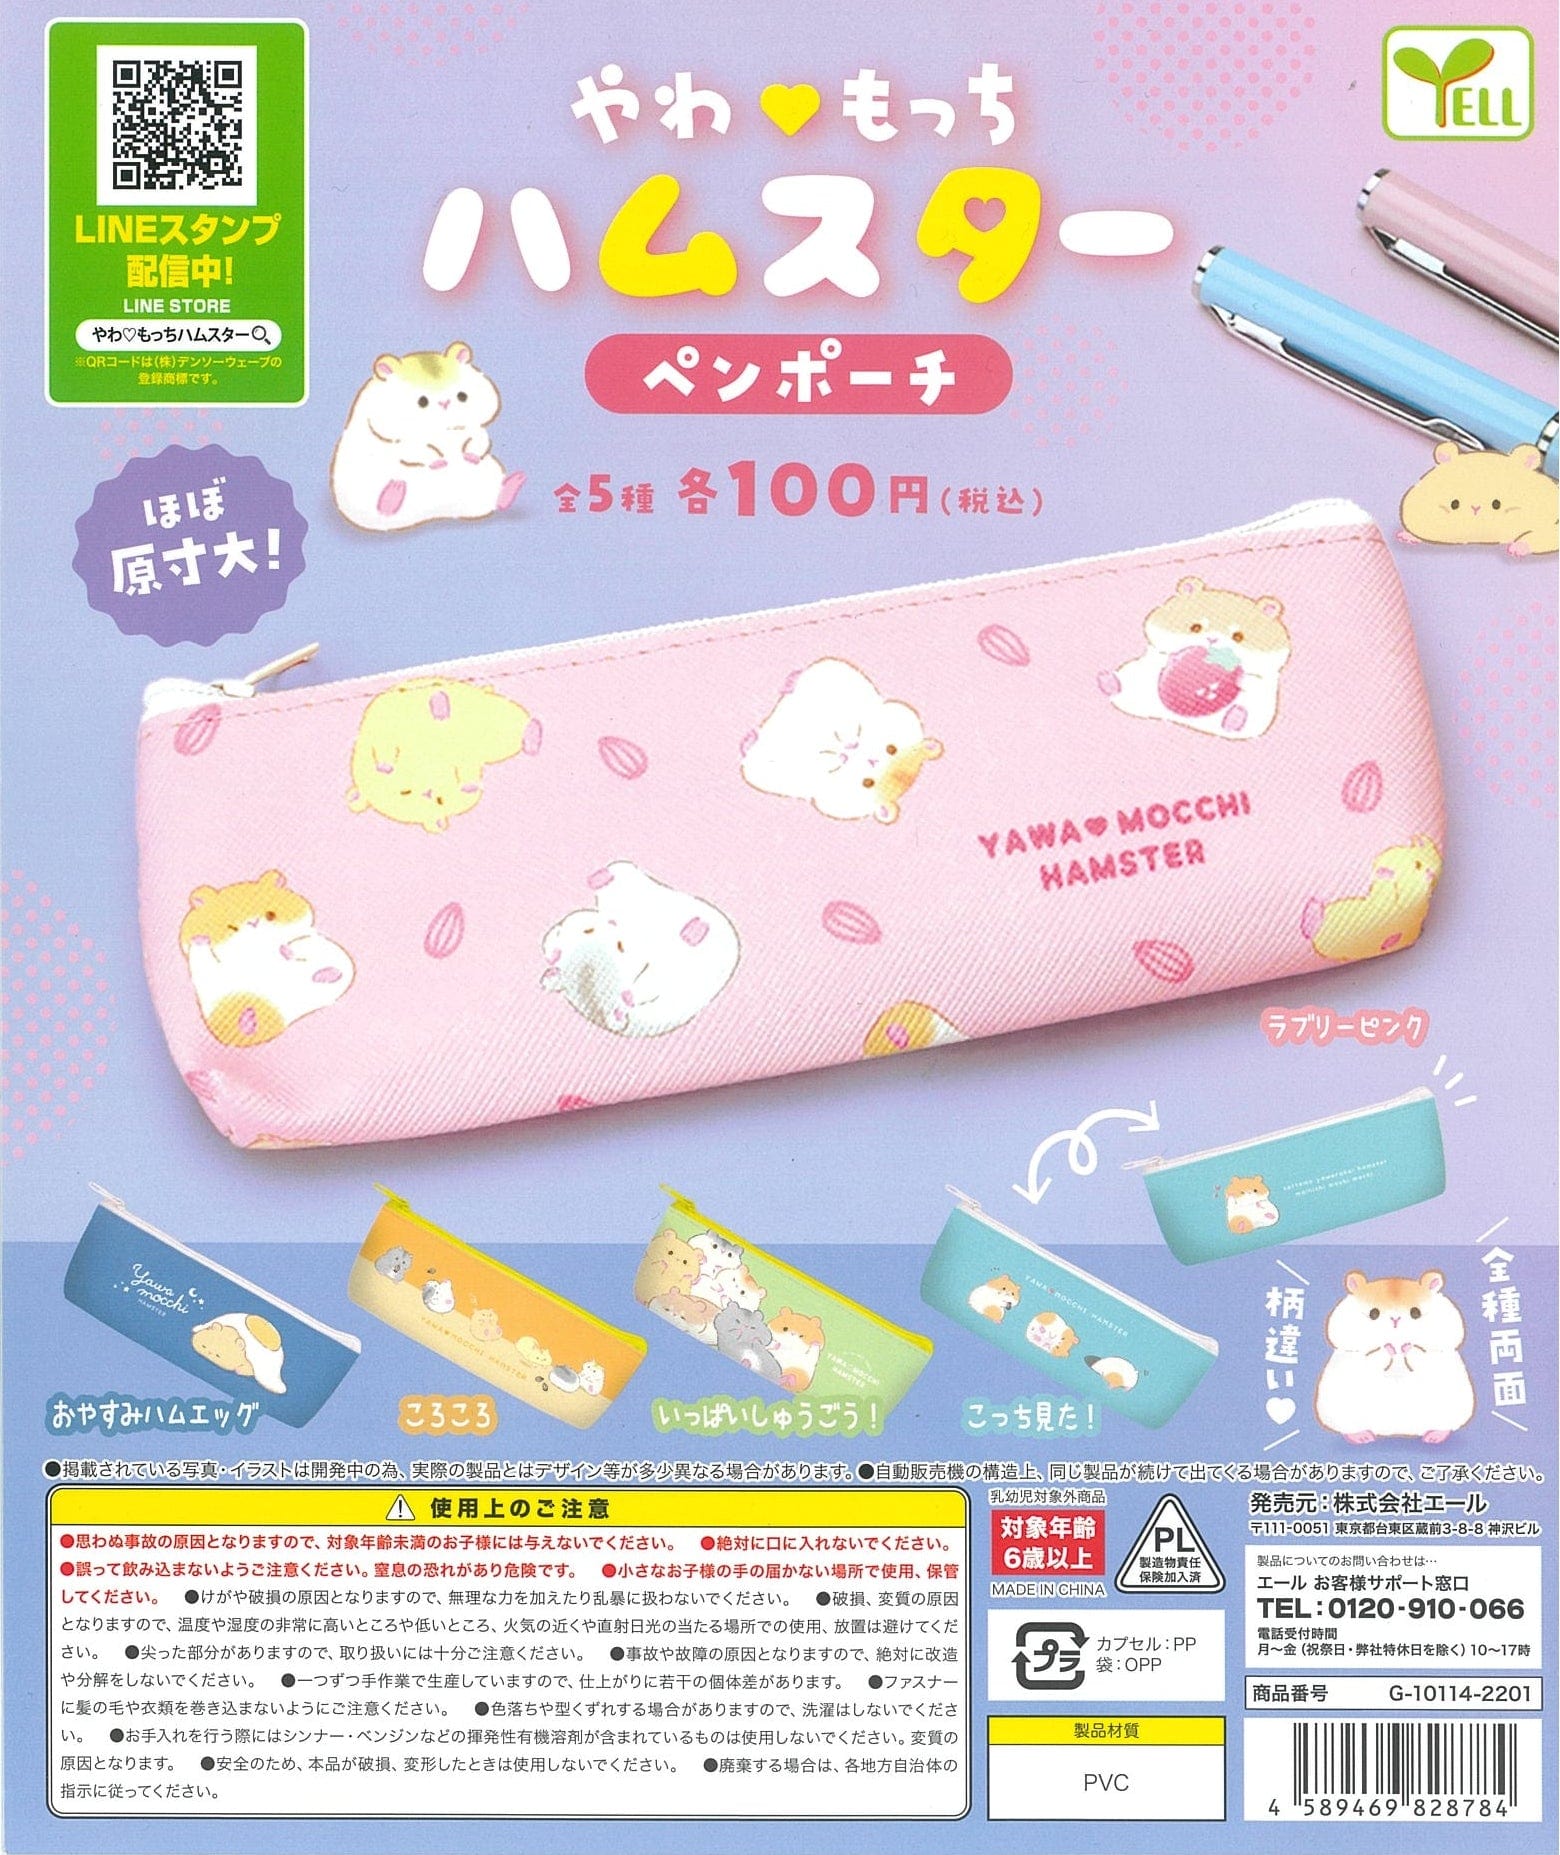 Yell CP1475 Yawamocchi Hamster Pen Pouch